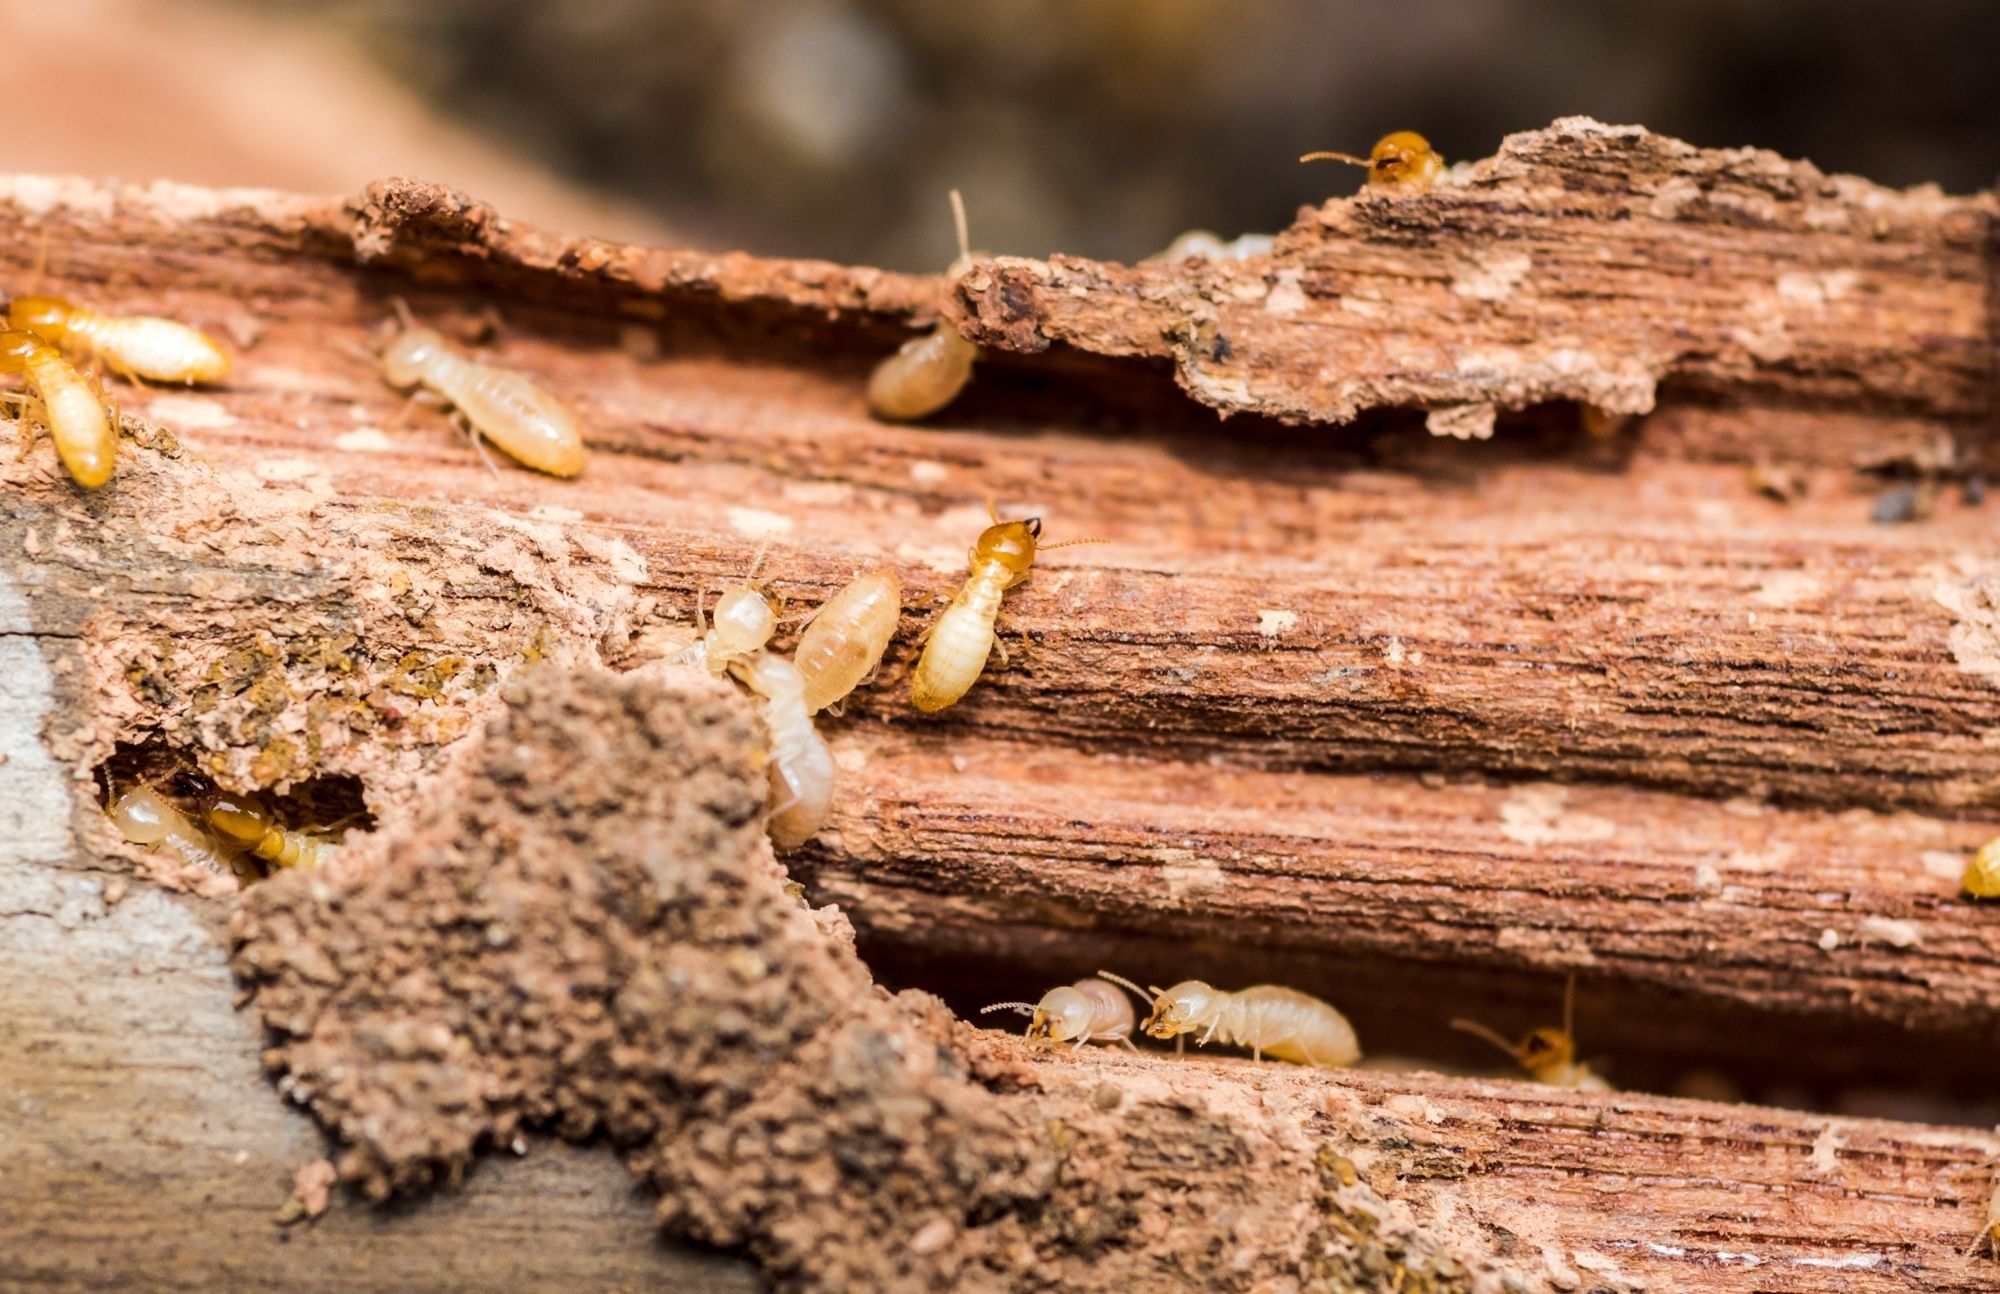 Wisco Termite Removal Experts